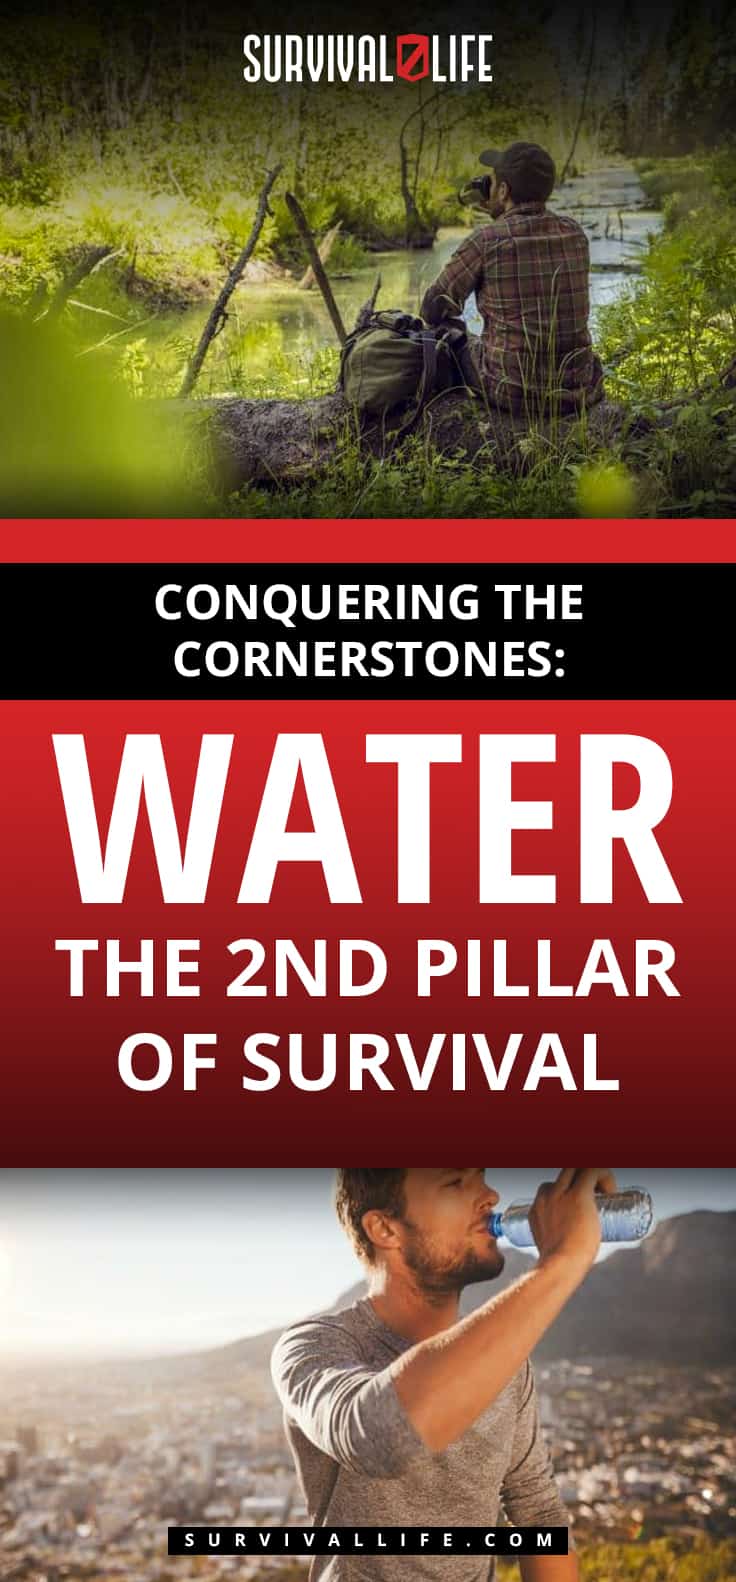 Placard | Water Survival | Conquering the Cornerstones: Water - the 2nd Pillar of Survival